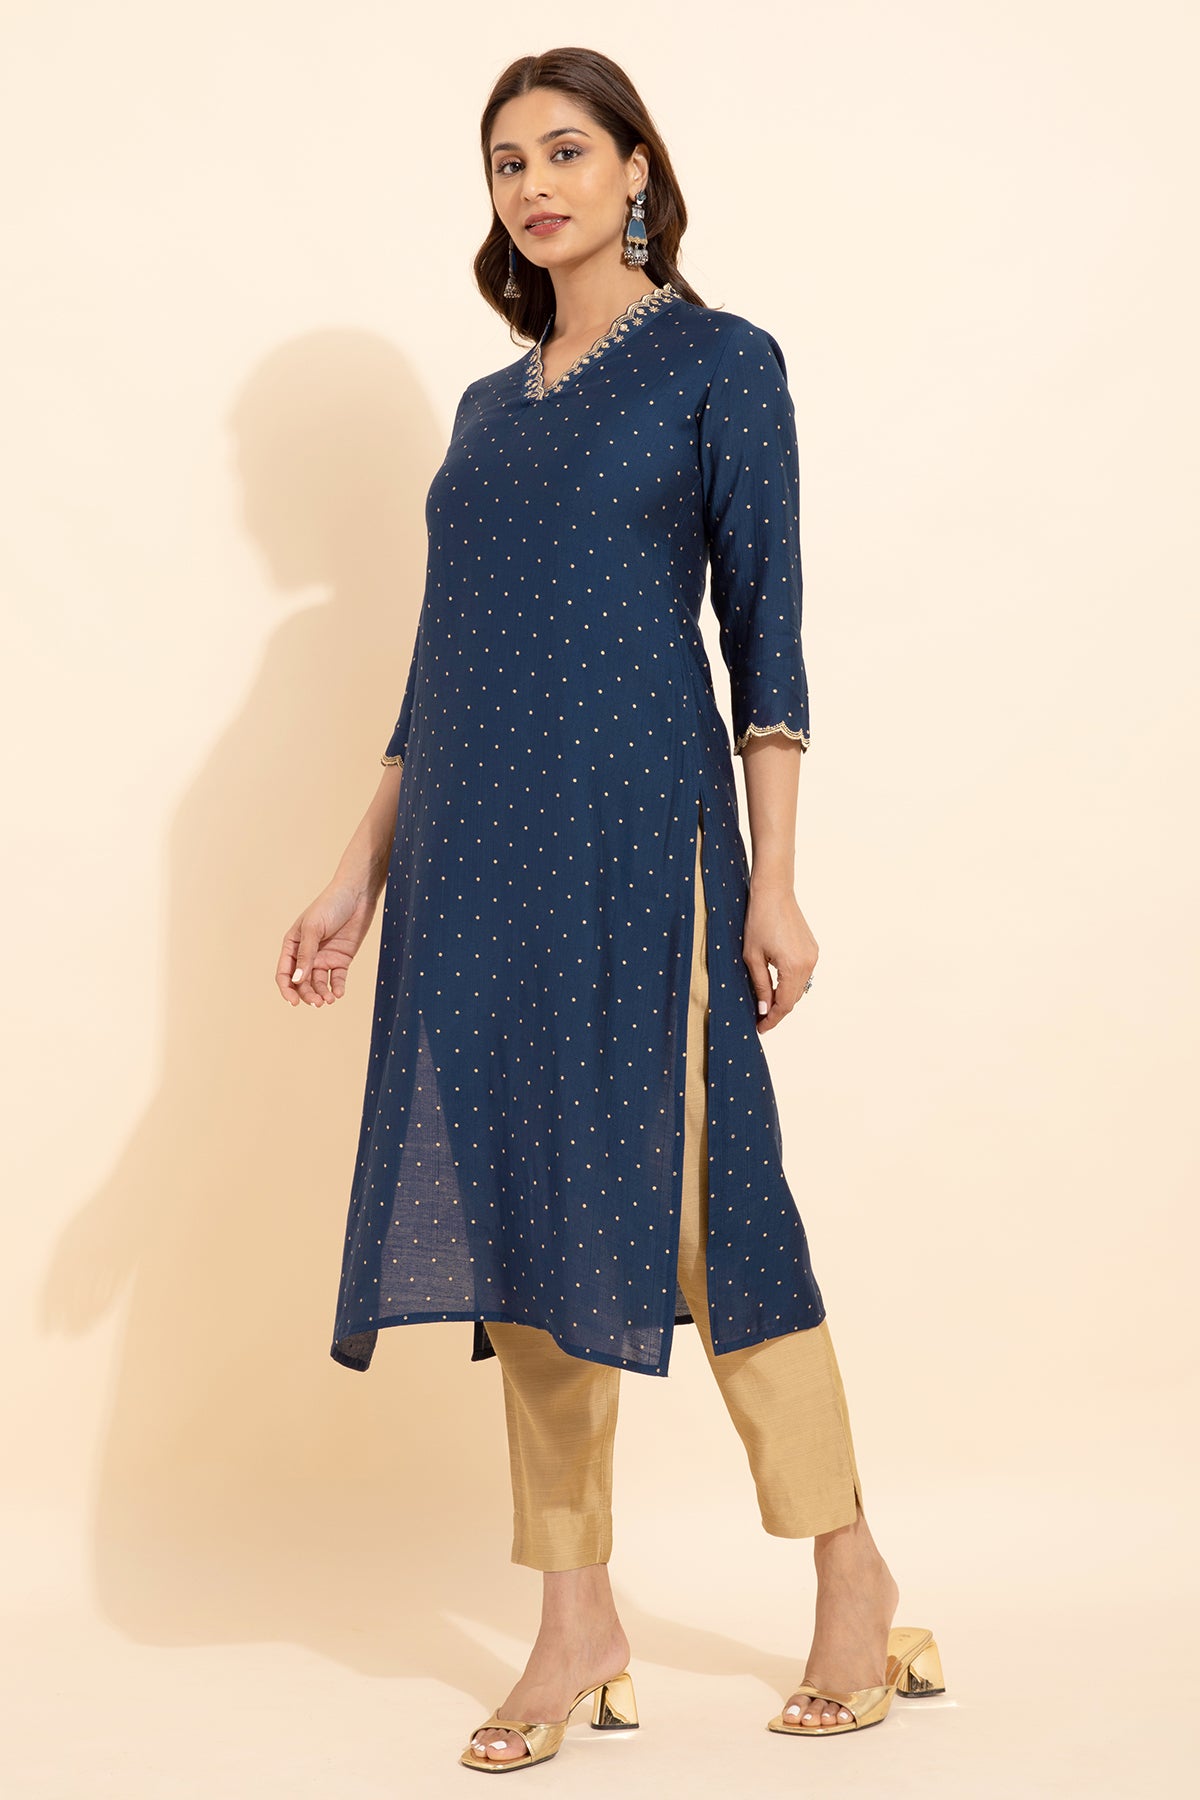 Floral Embroidered Neckline With Allover Polka Dots Printed Kurta - Blue